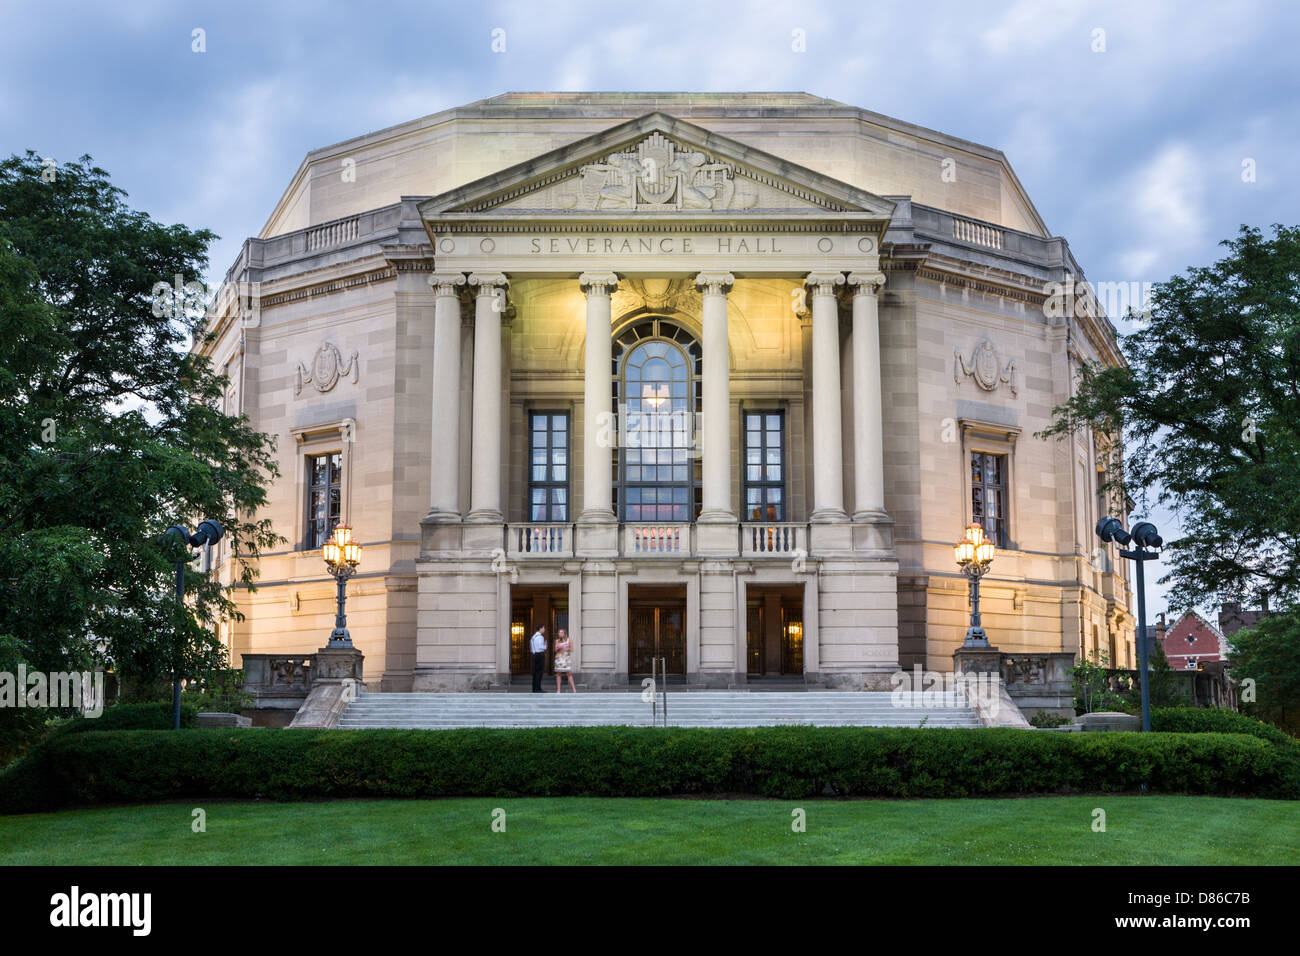 Severance Hall is home to Cleveland Orchestra, Cleveland, Ohio Stock Photo